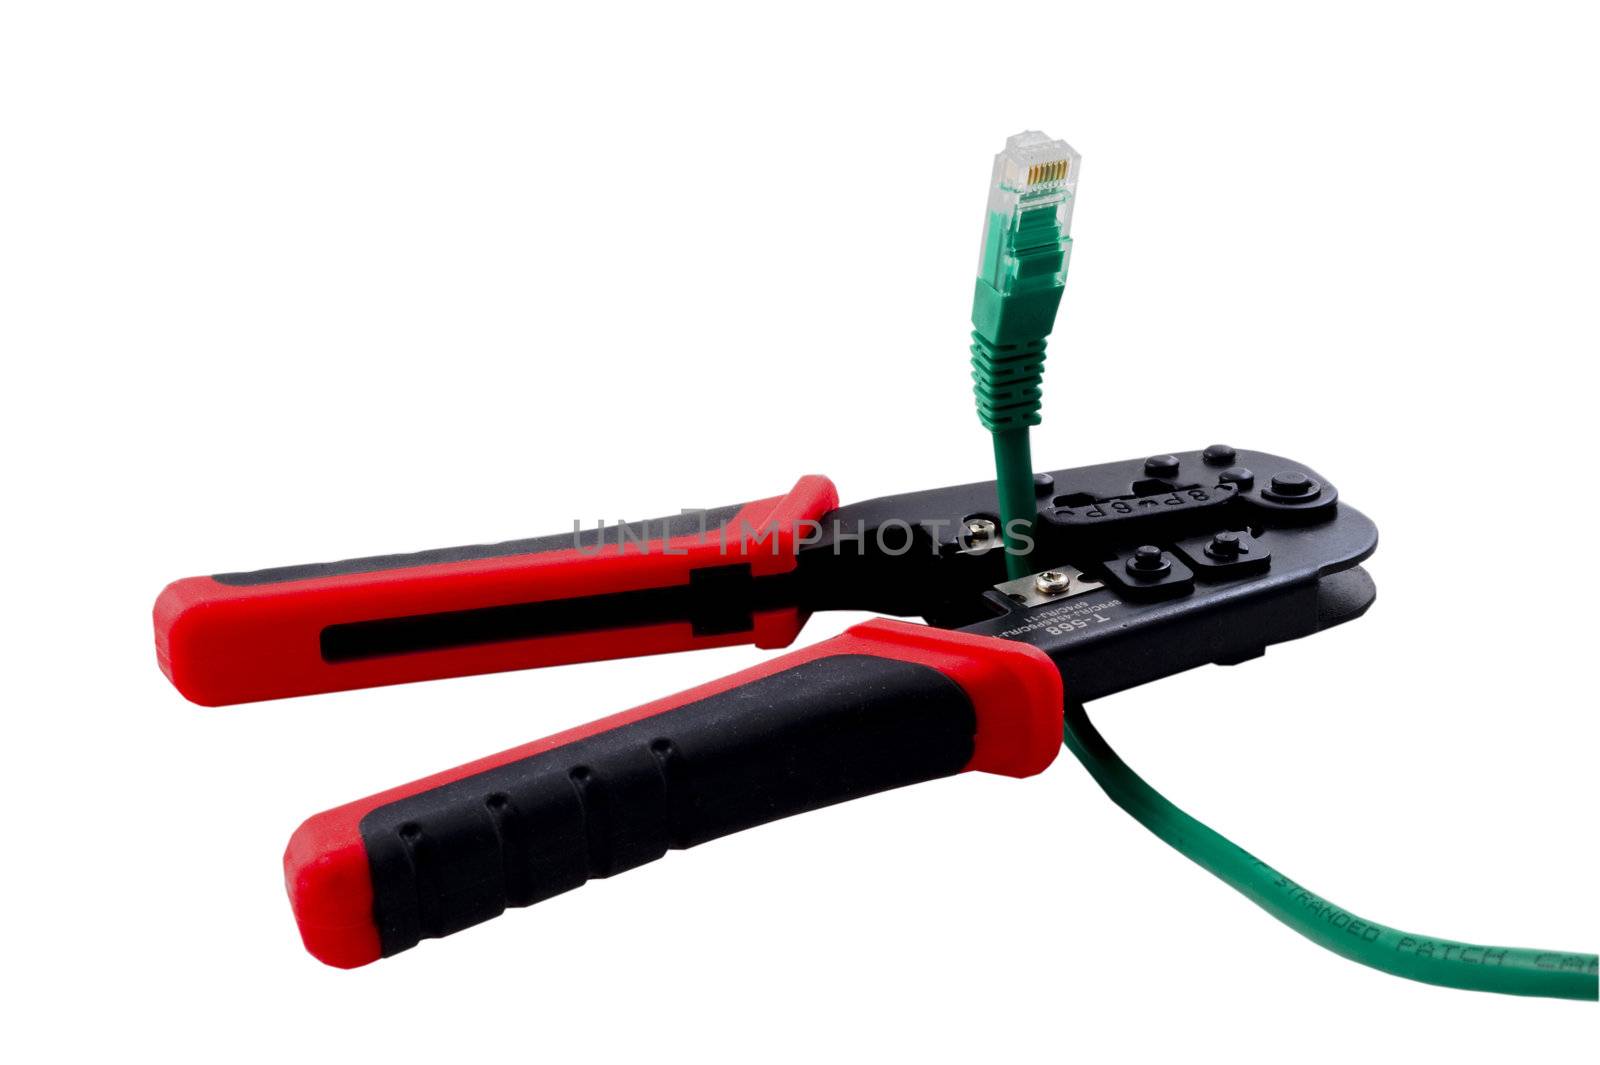 Climping tool and network cable  isollated on white background